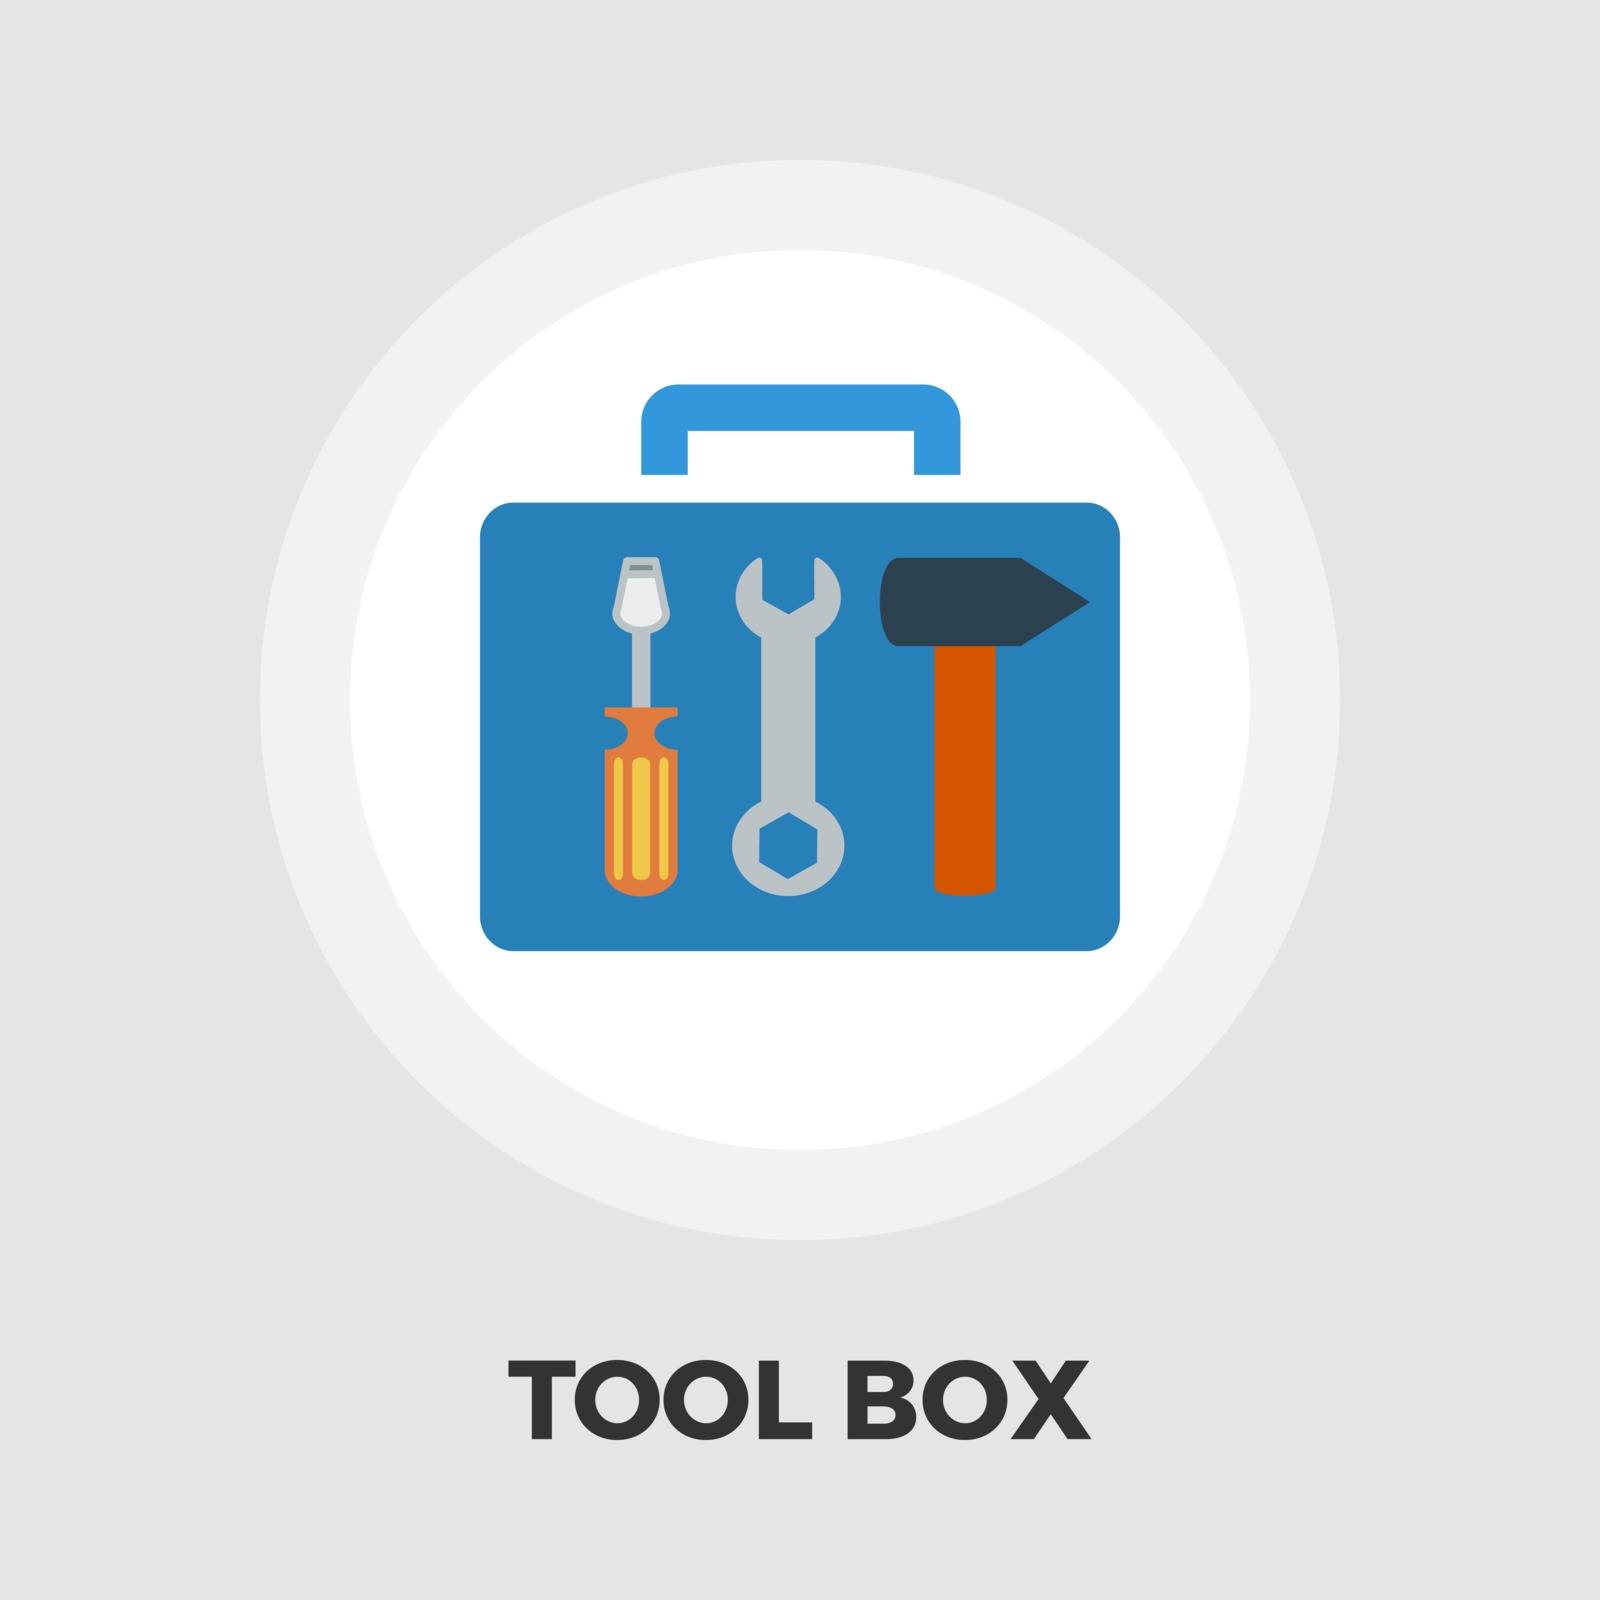 Tool box icon vector. Flat icon isolated on the white background. Editable EPS file. Vector illustration.